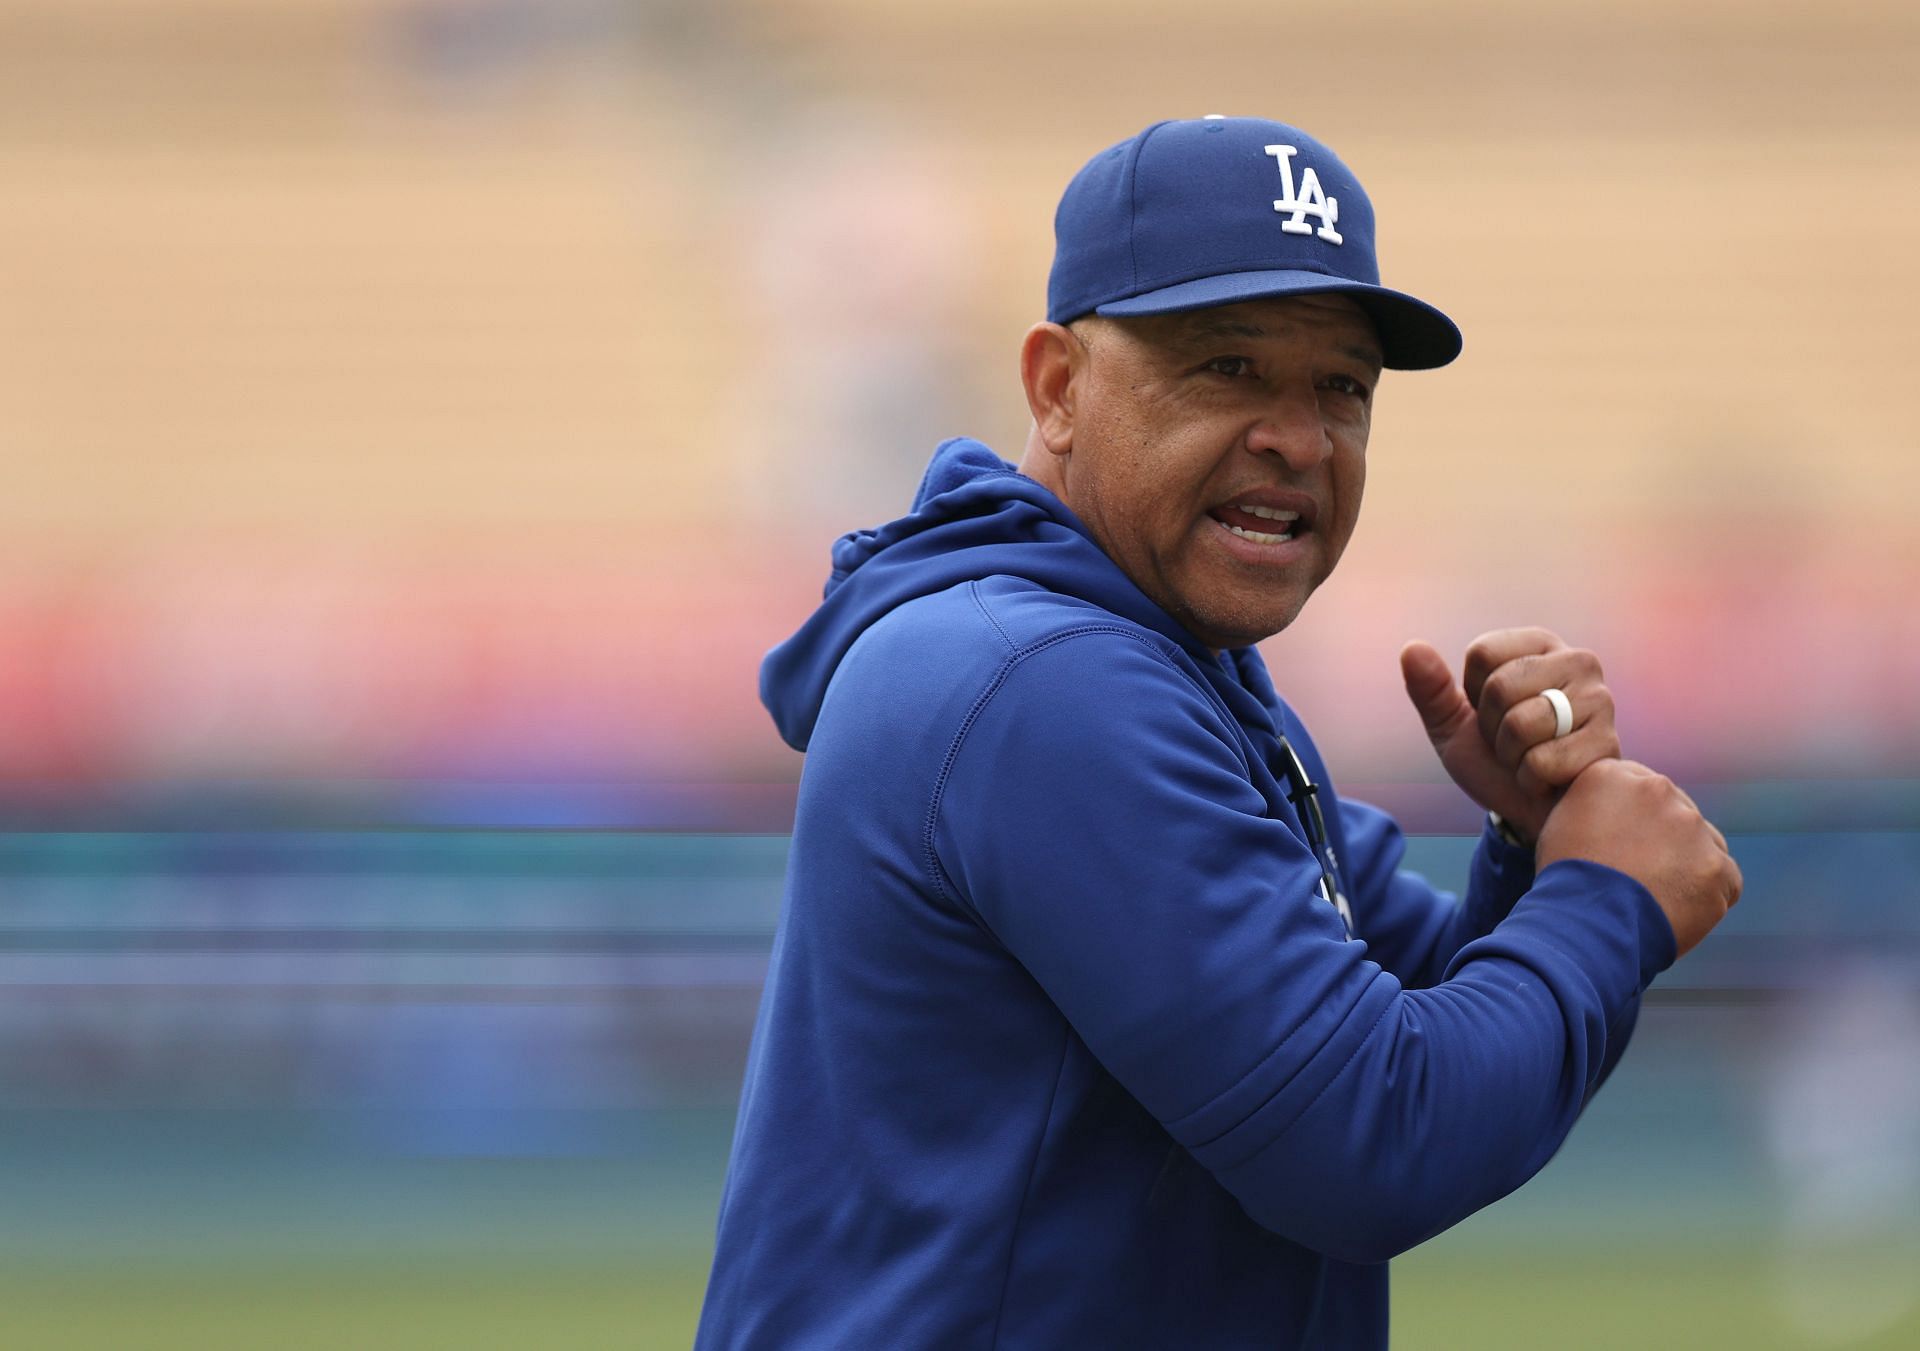 Dodgers notes: Dave Roberts doesn't plan any hair-razing changes